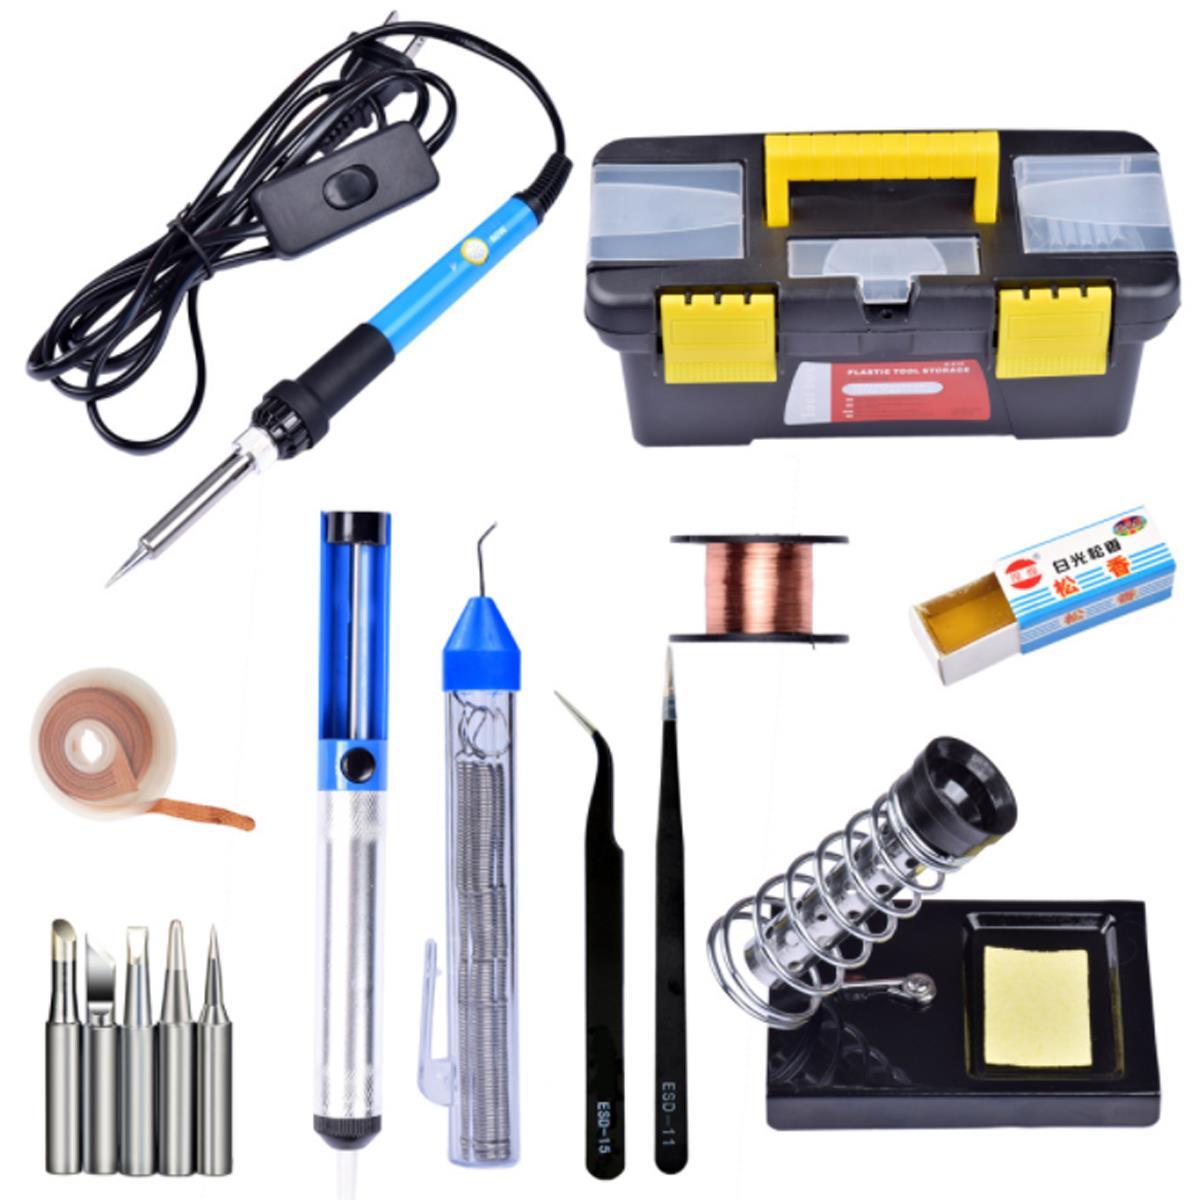 110/220V 60W Adjustable Temperature Electric Welding Soldering Tools Kit with Switch 1